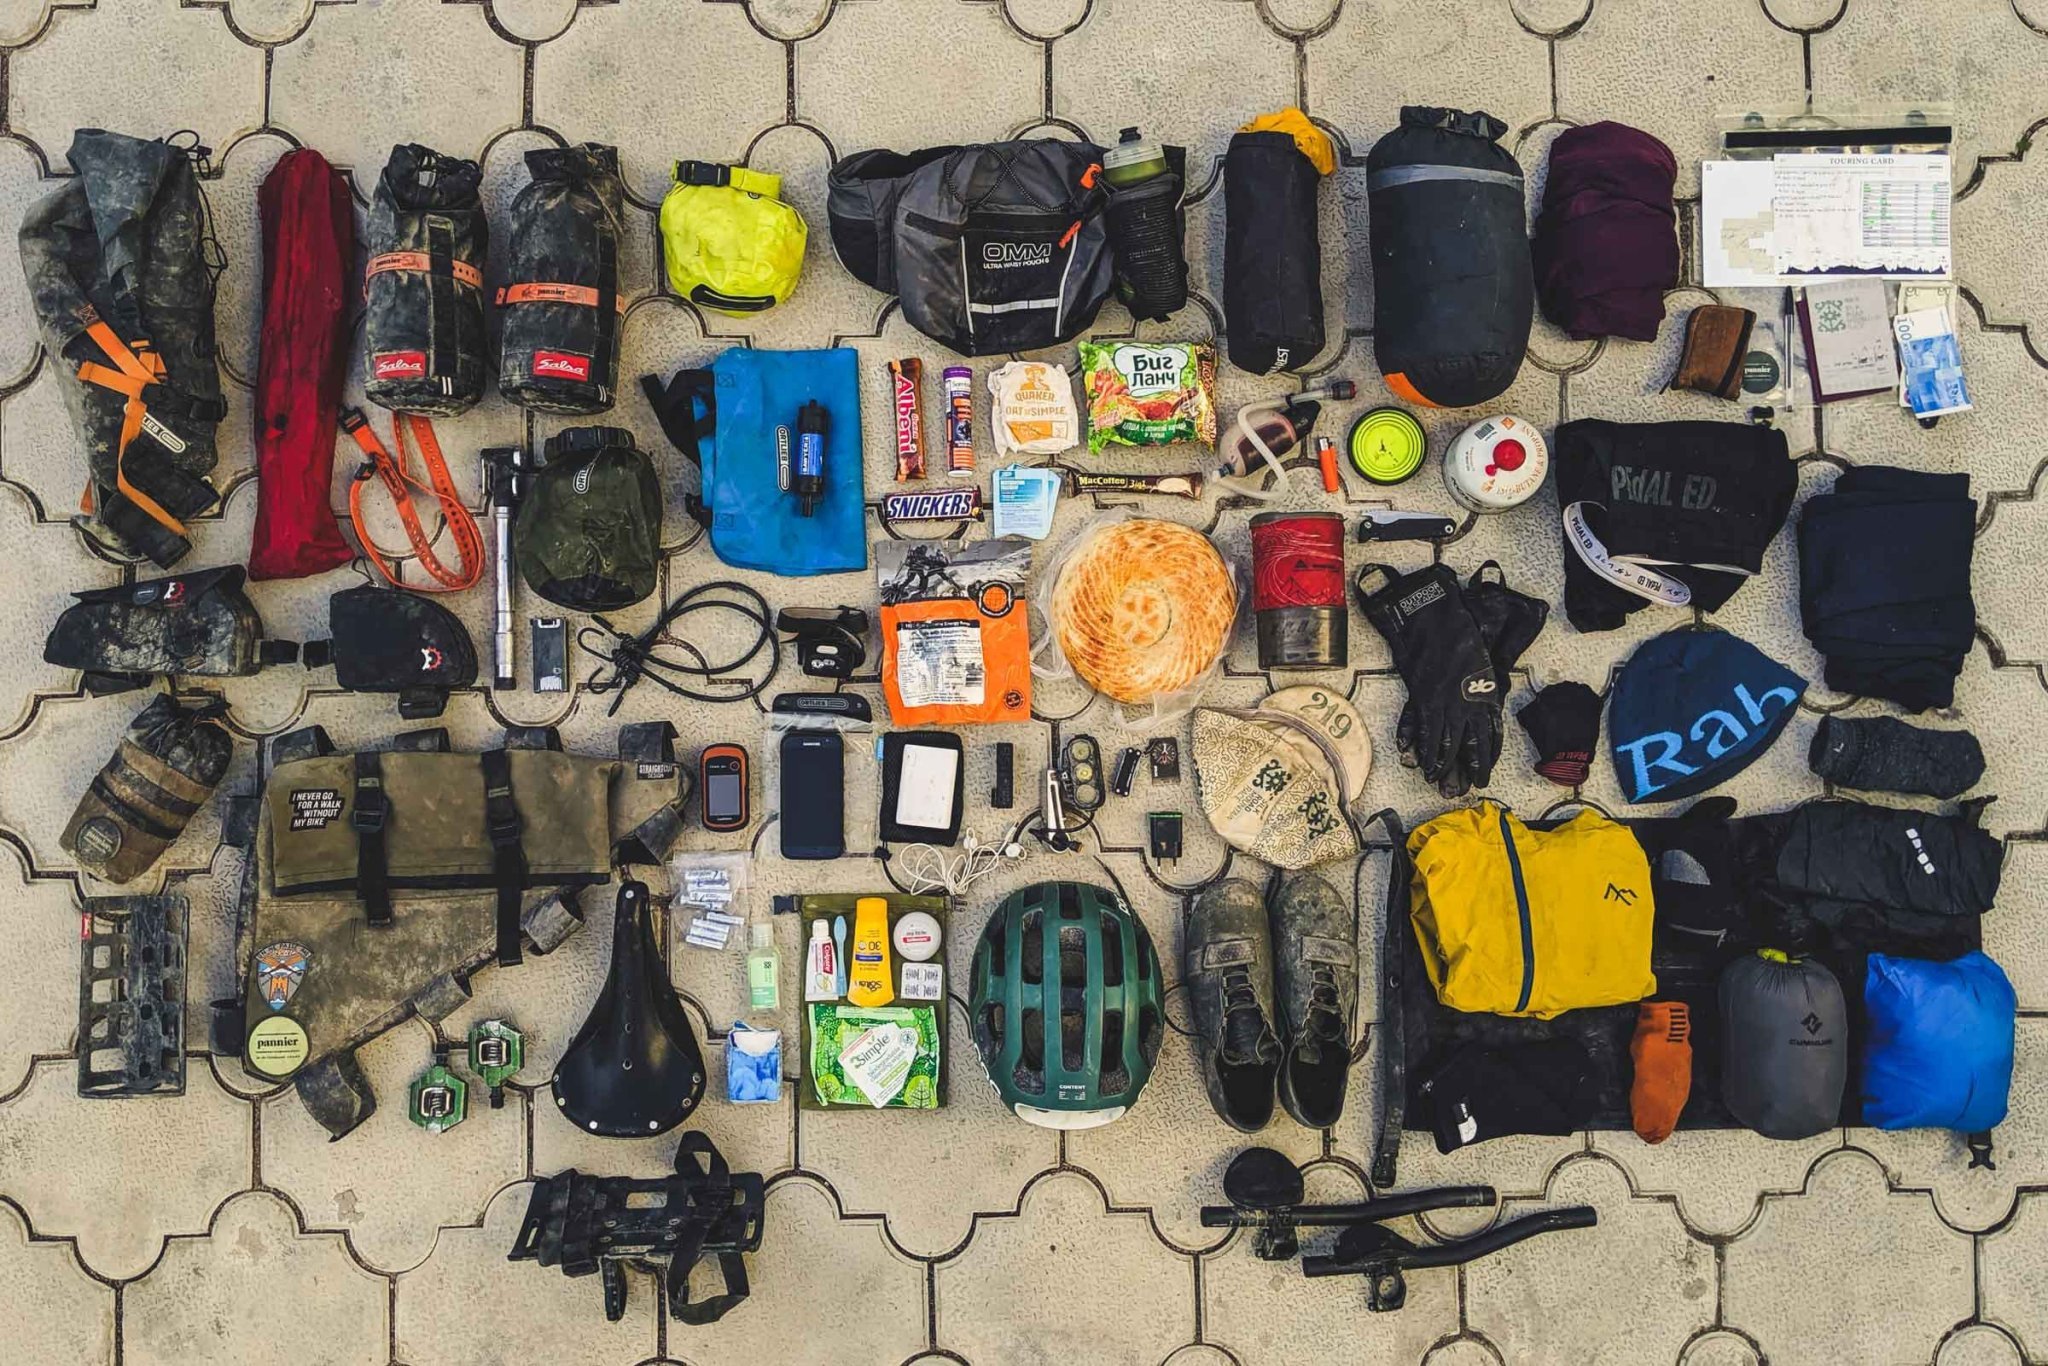 What do you need to join a bikepacking tour or expedition?